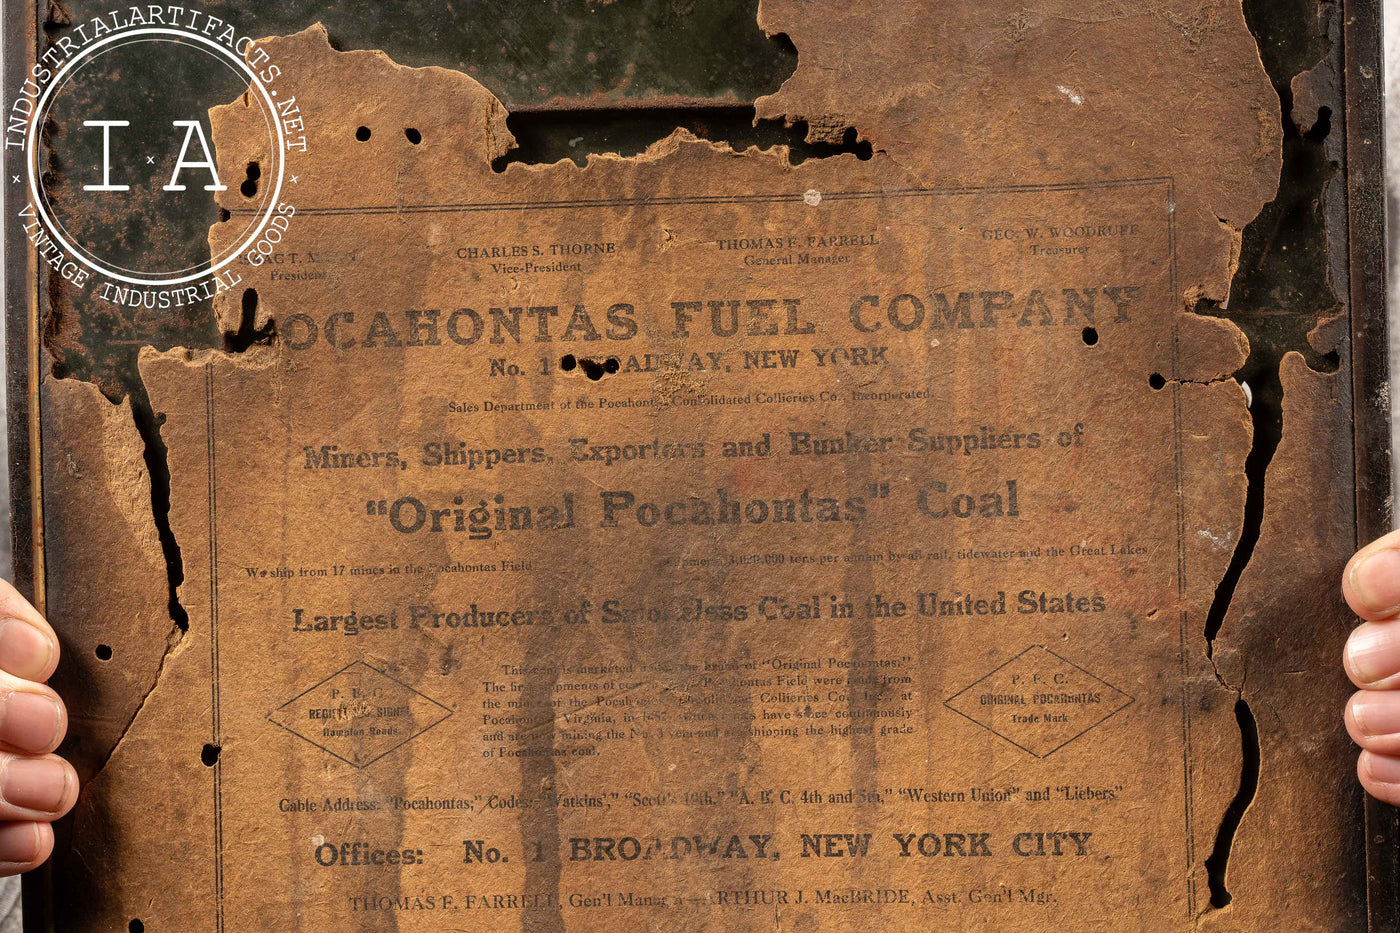 Early 20th Century Embossed TOC Pocahontas Advertising Sign